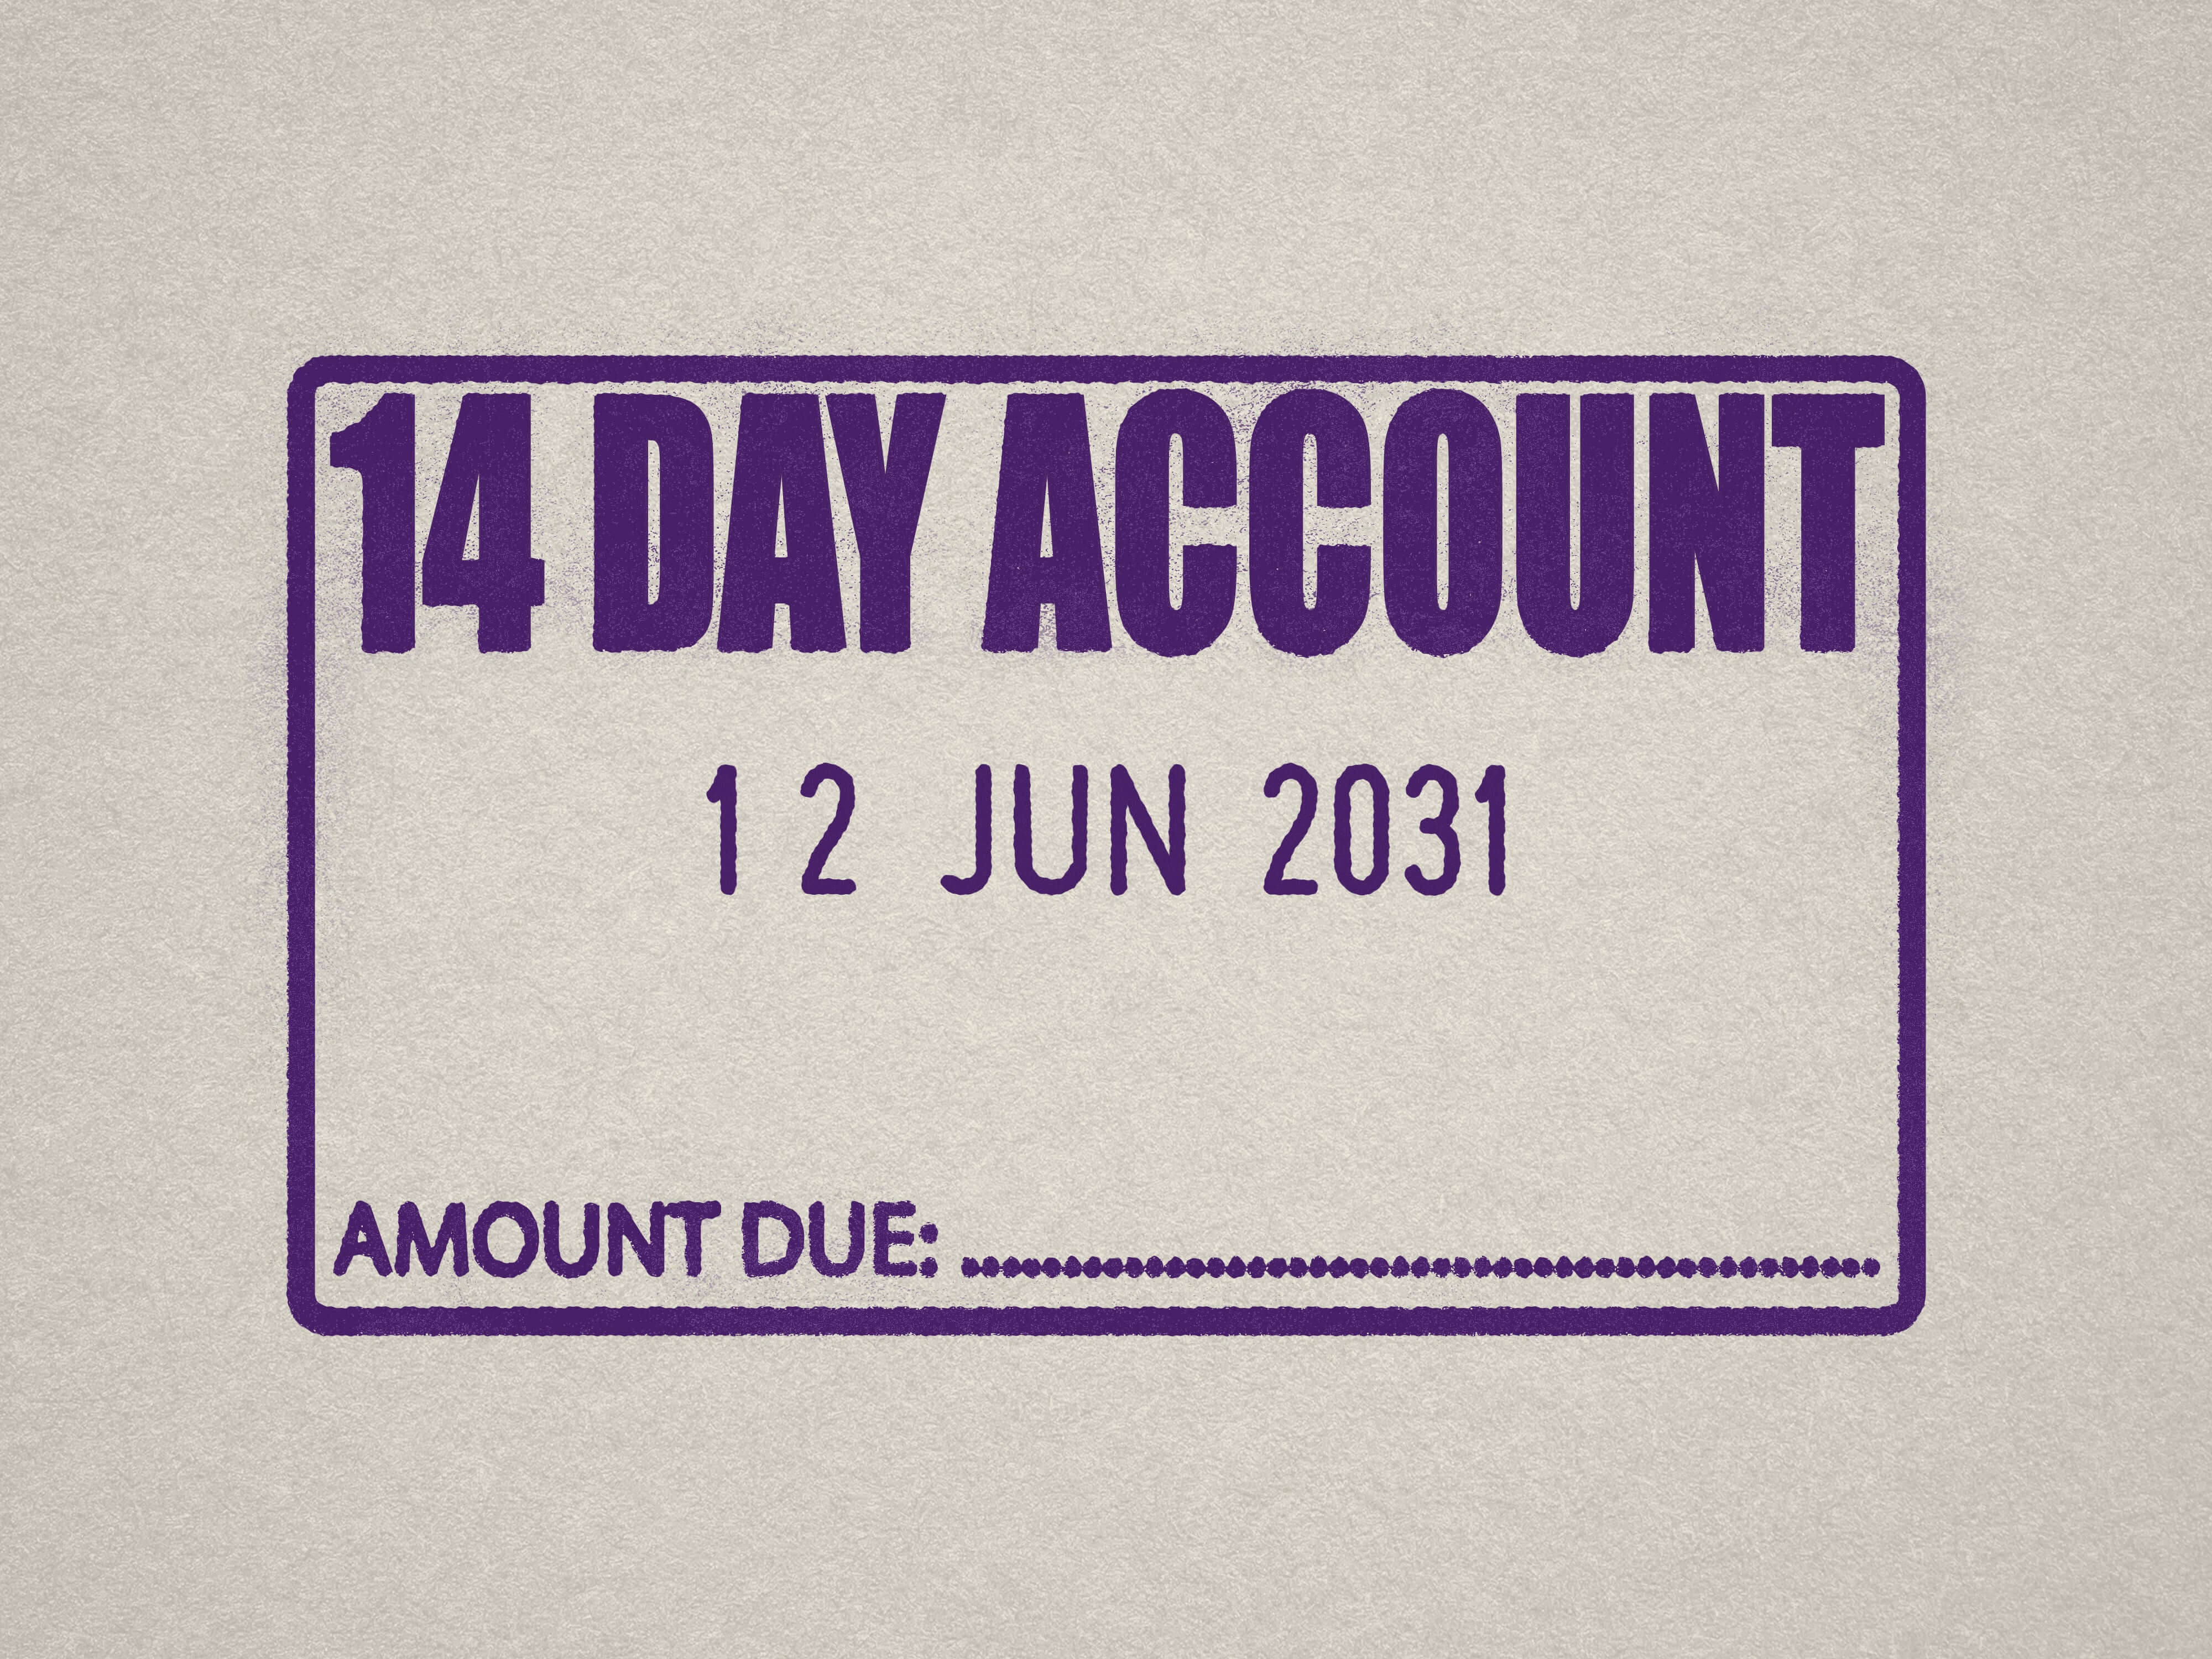 Ready Date 14 Day Account Stamp